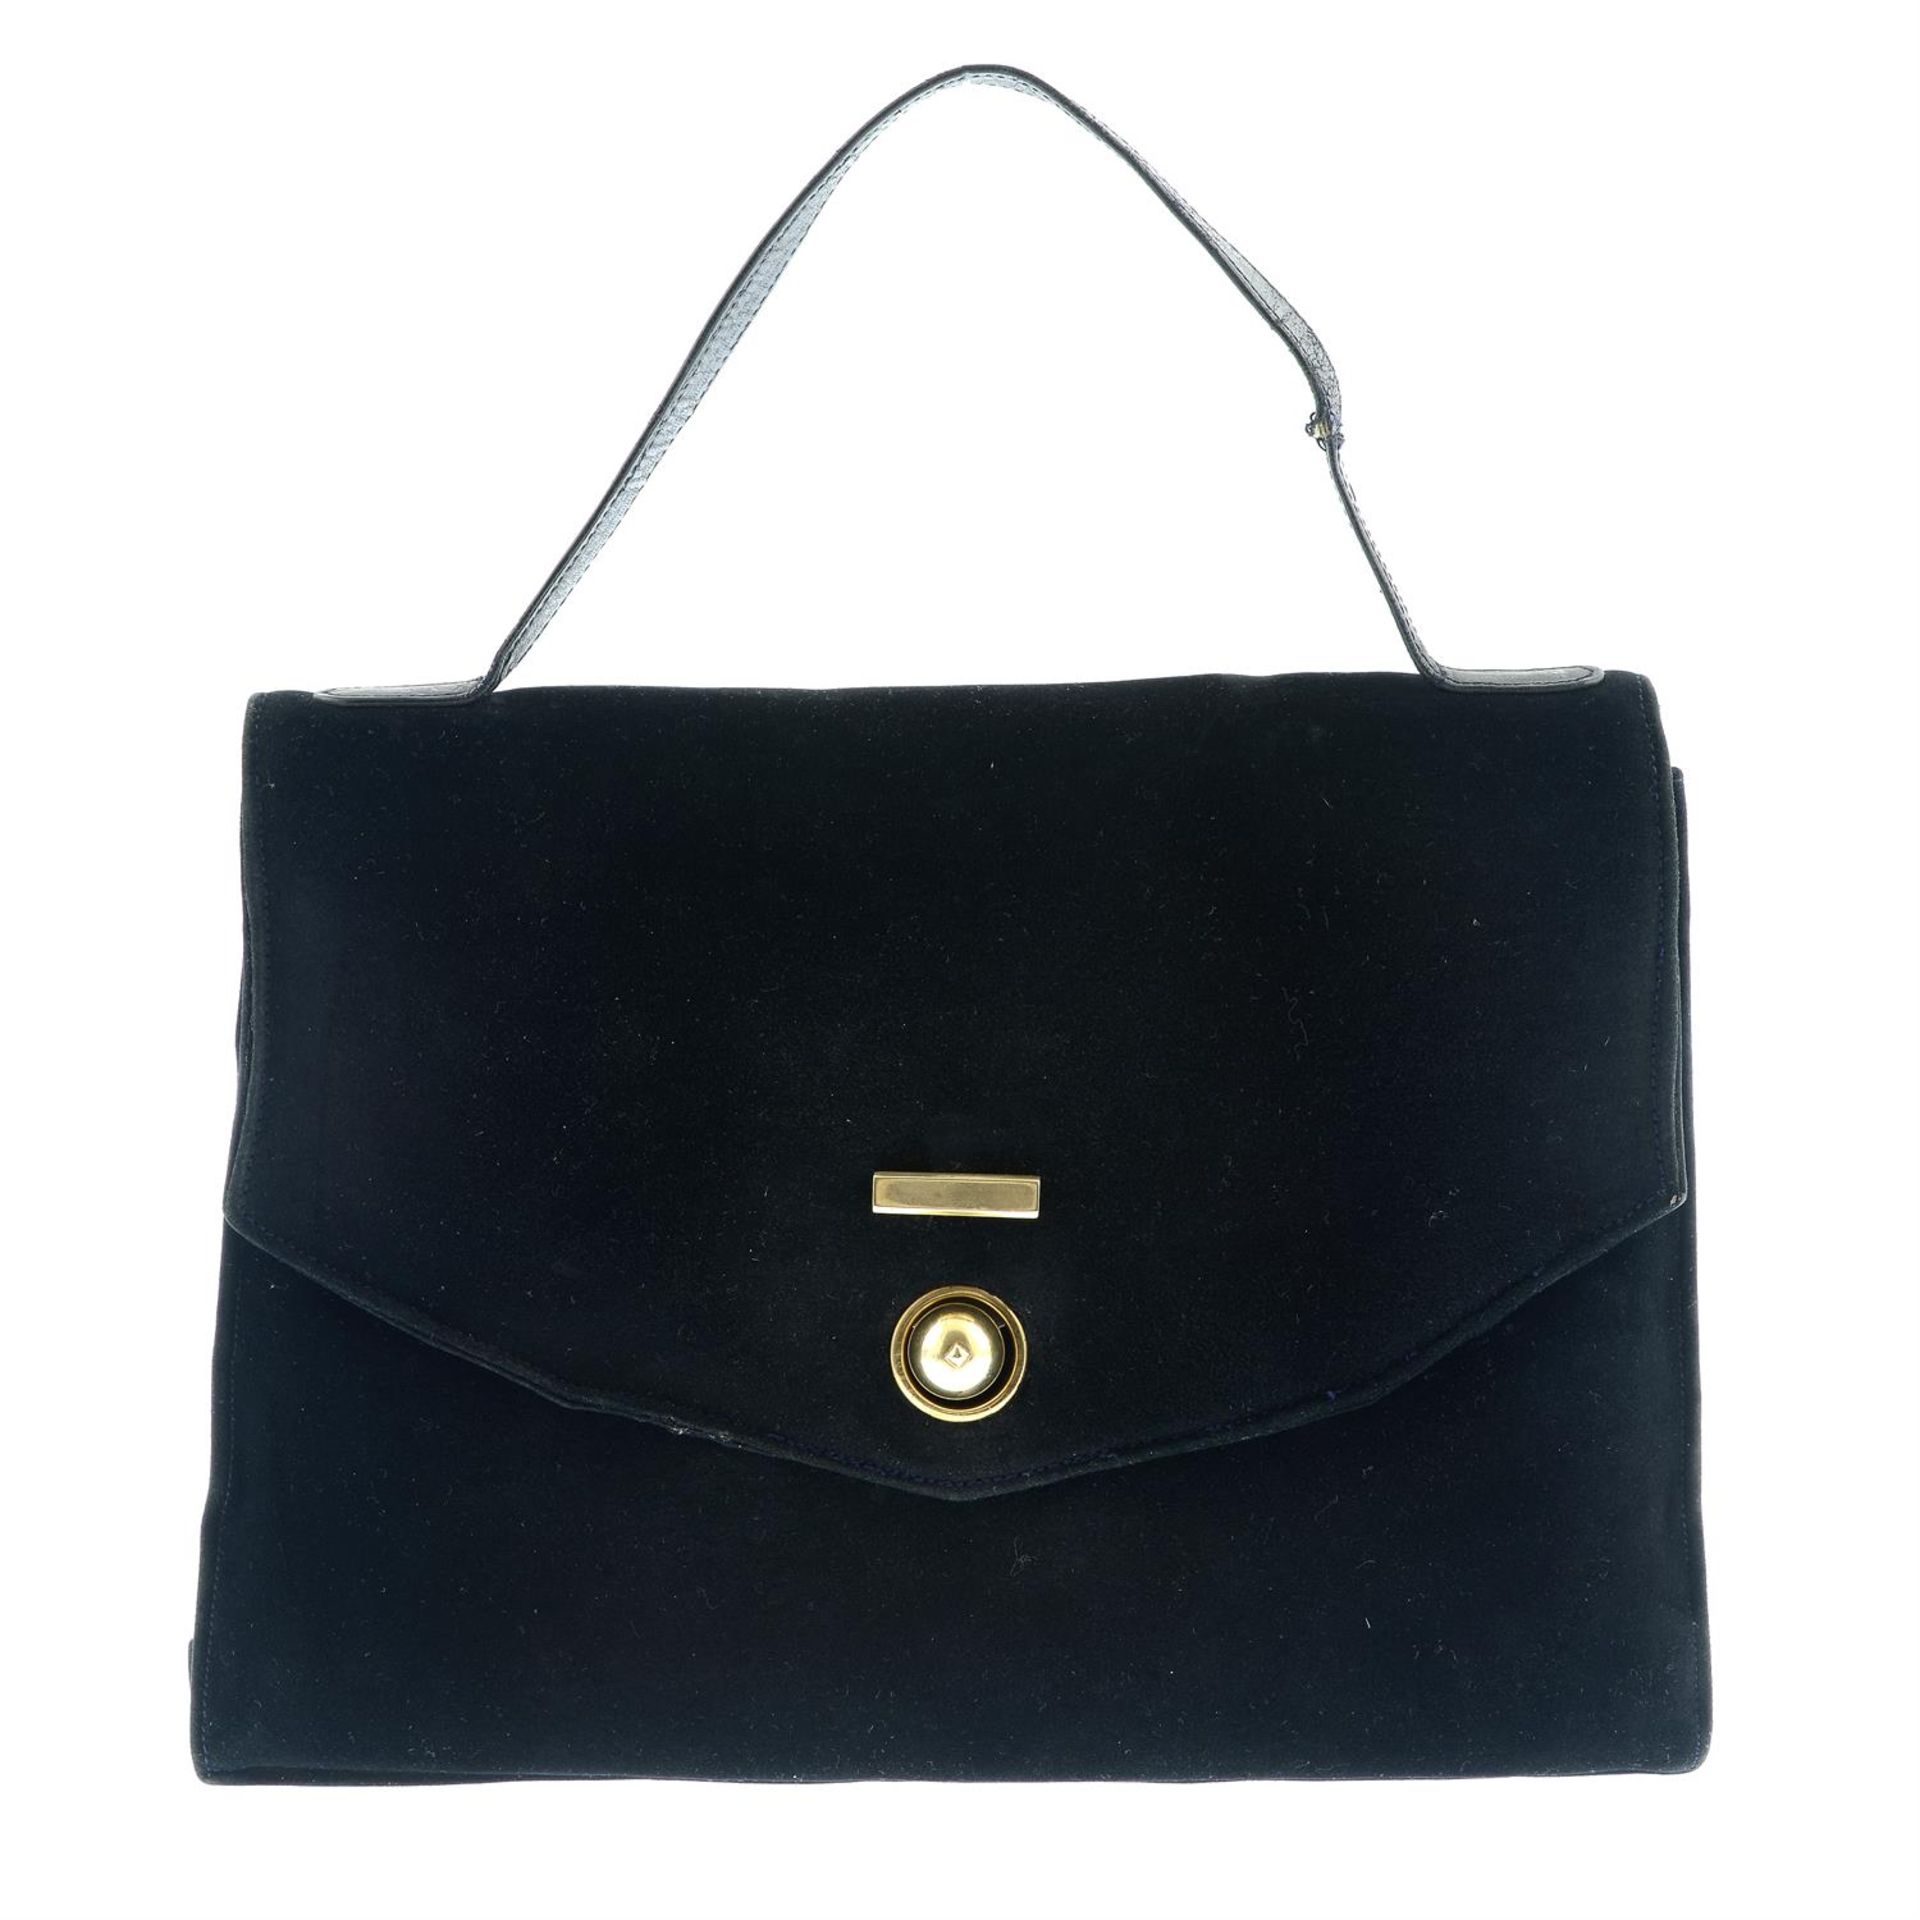 CARTIER - a 1930s black suede leather handbag with 9ct gold hardware.